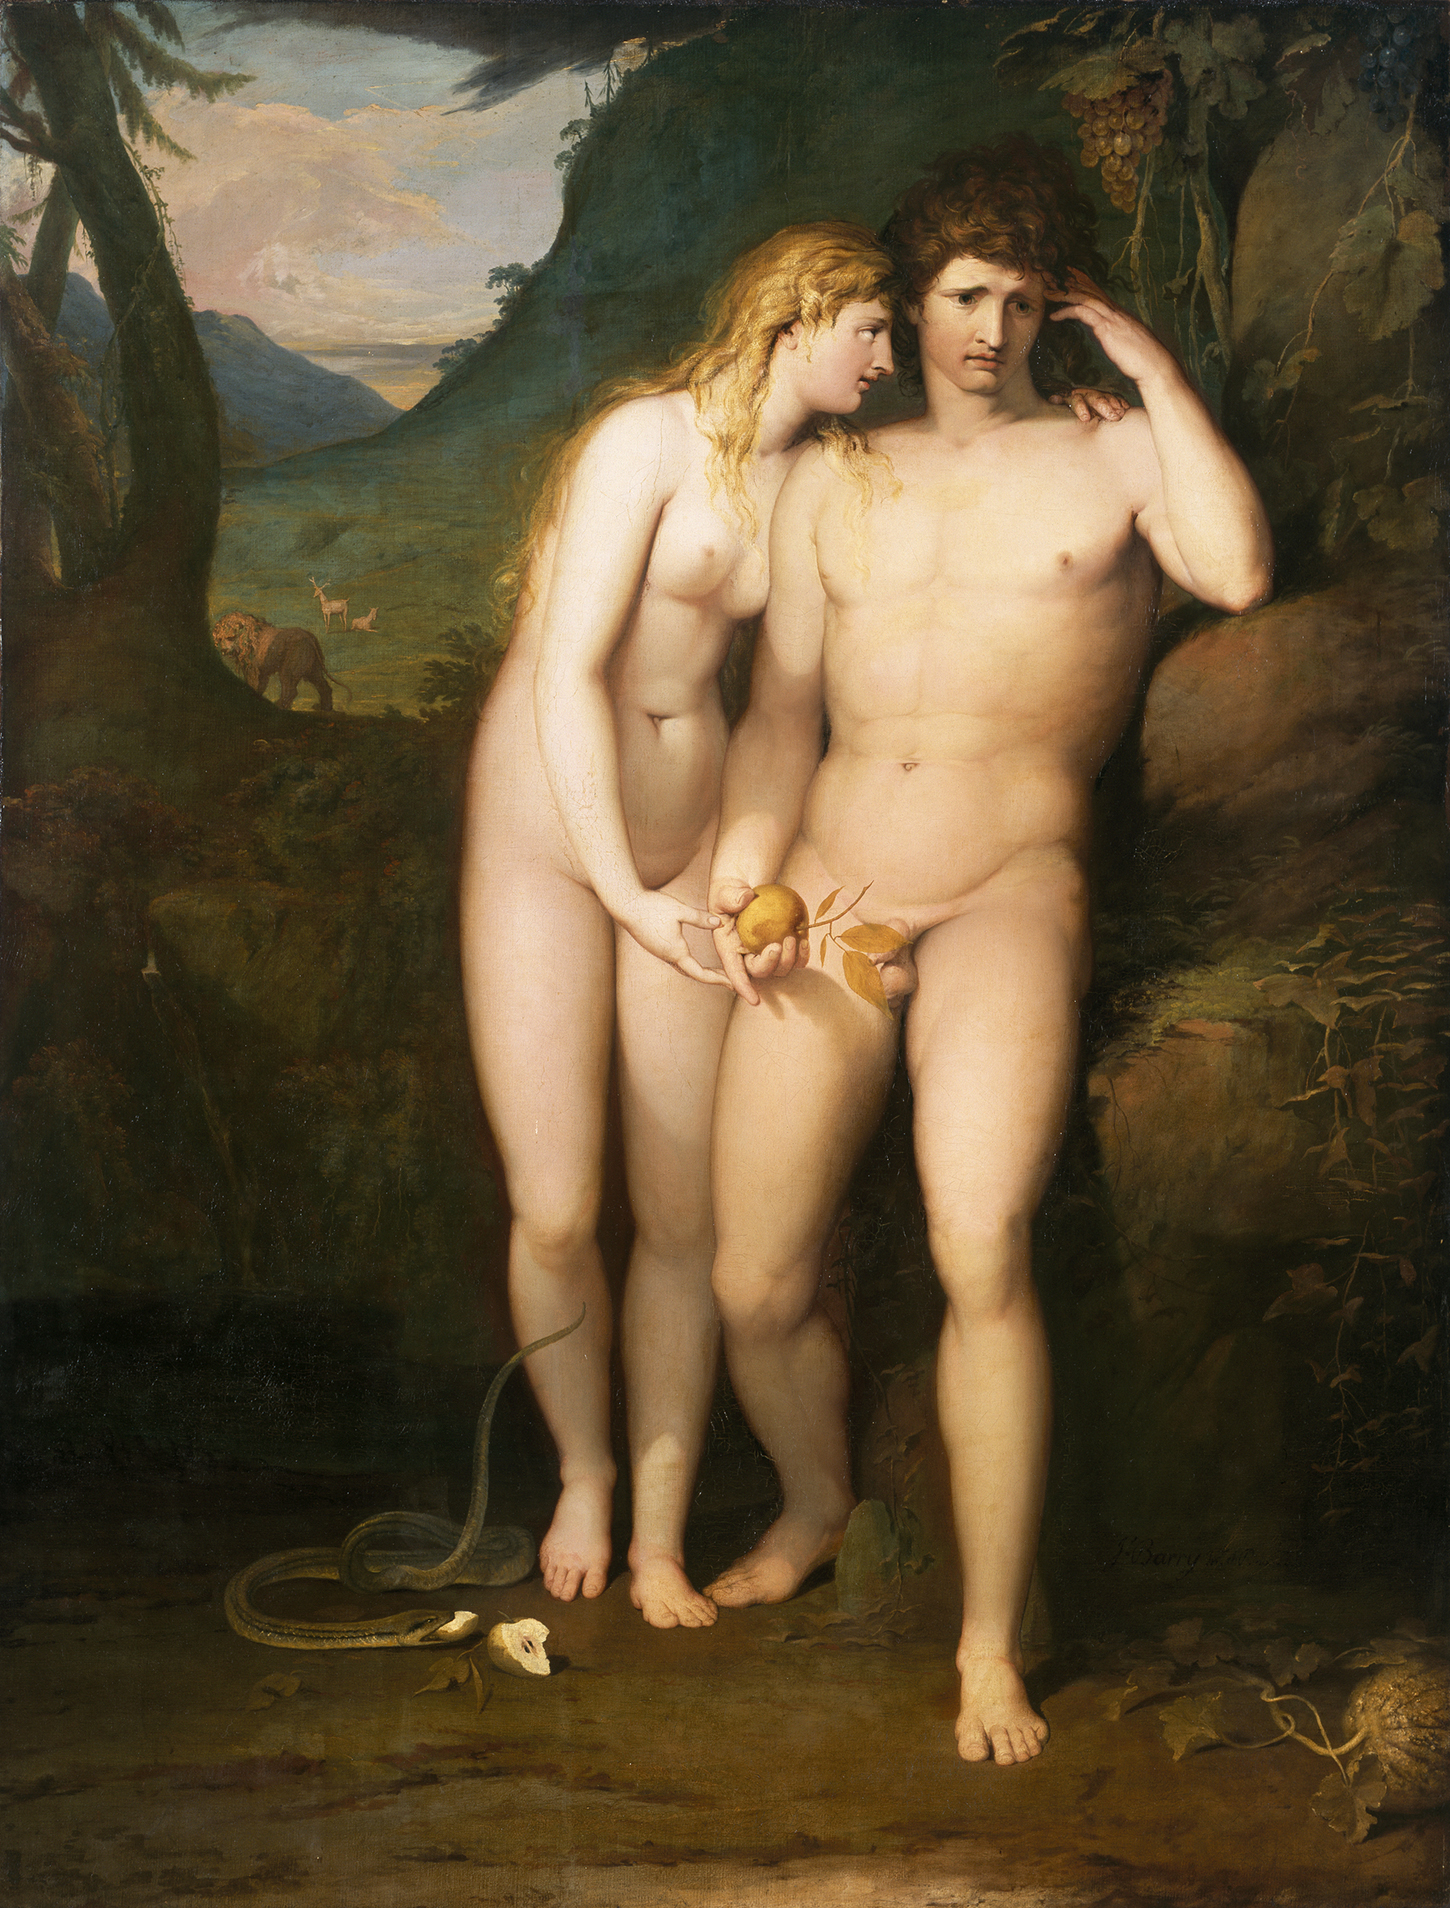 Adam and Eve stand together. On the ground, a snake, and a discarded half-eaten apple.